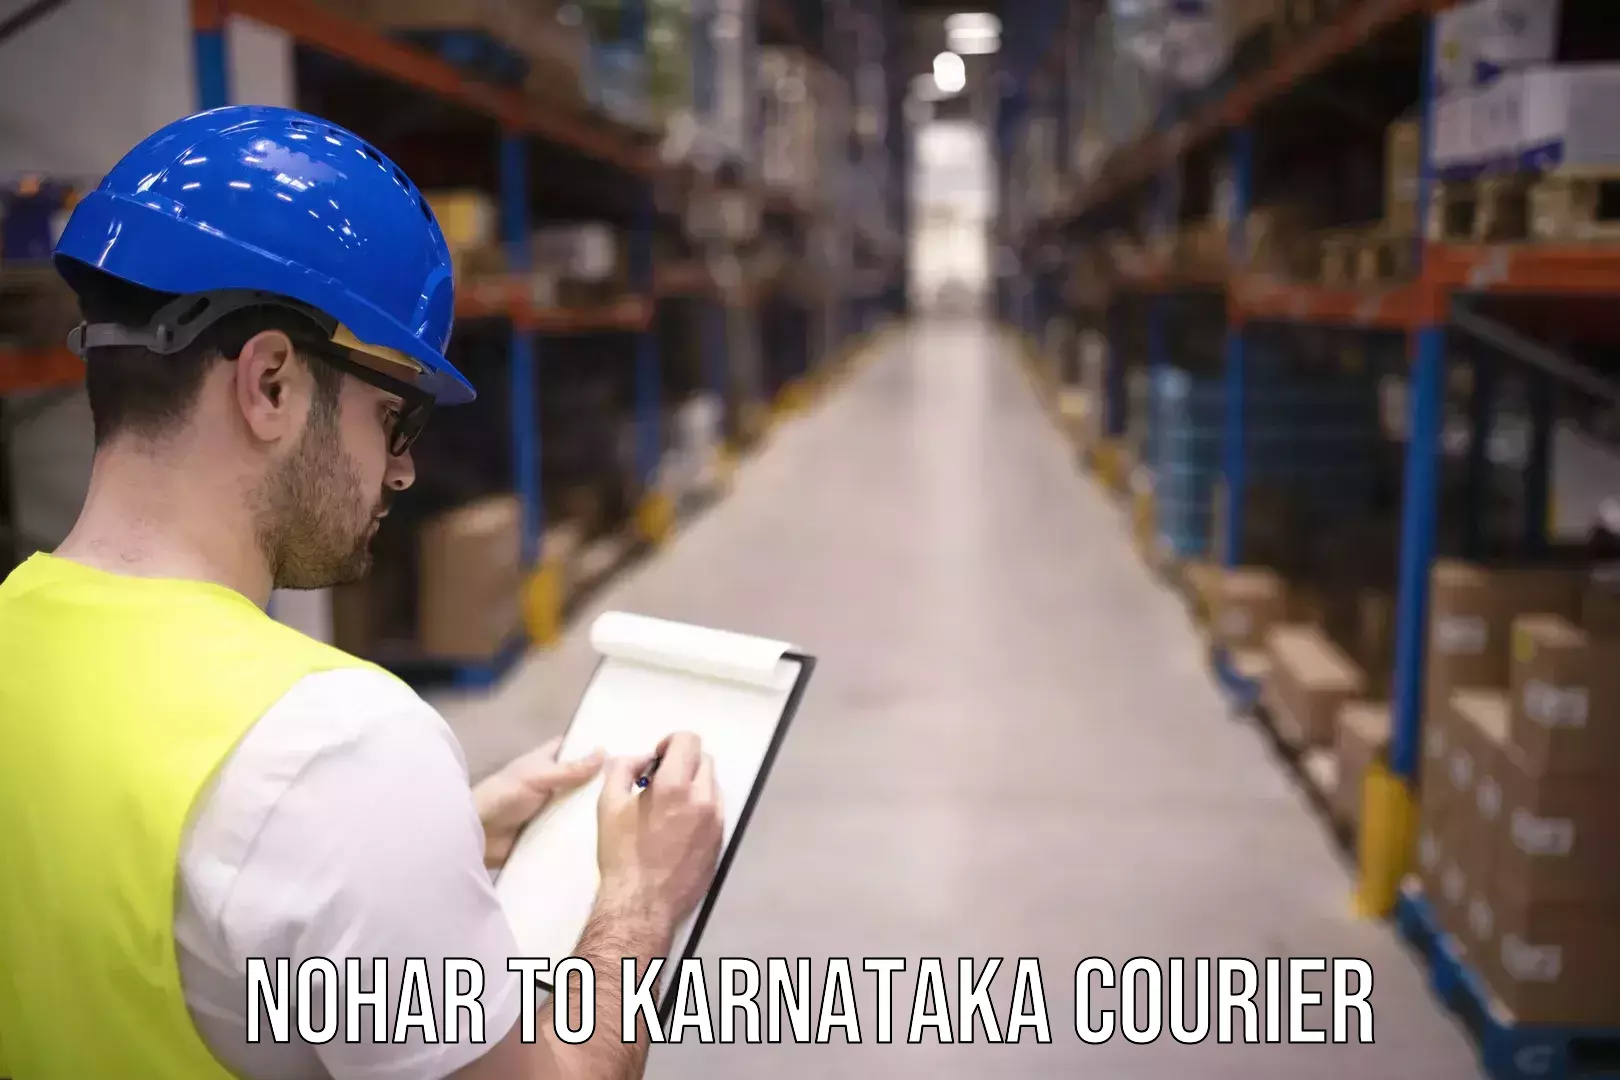 Subscription-based courier Nohar to Banavara